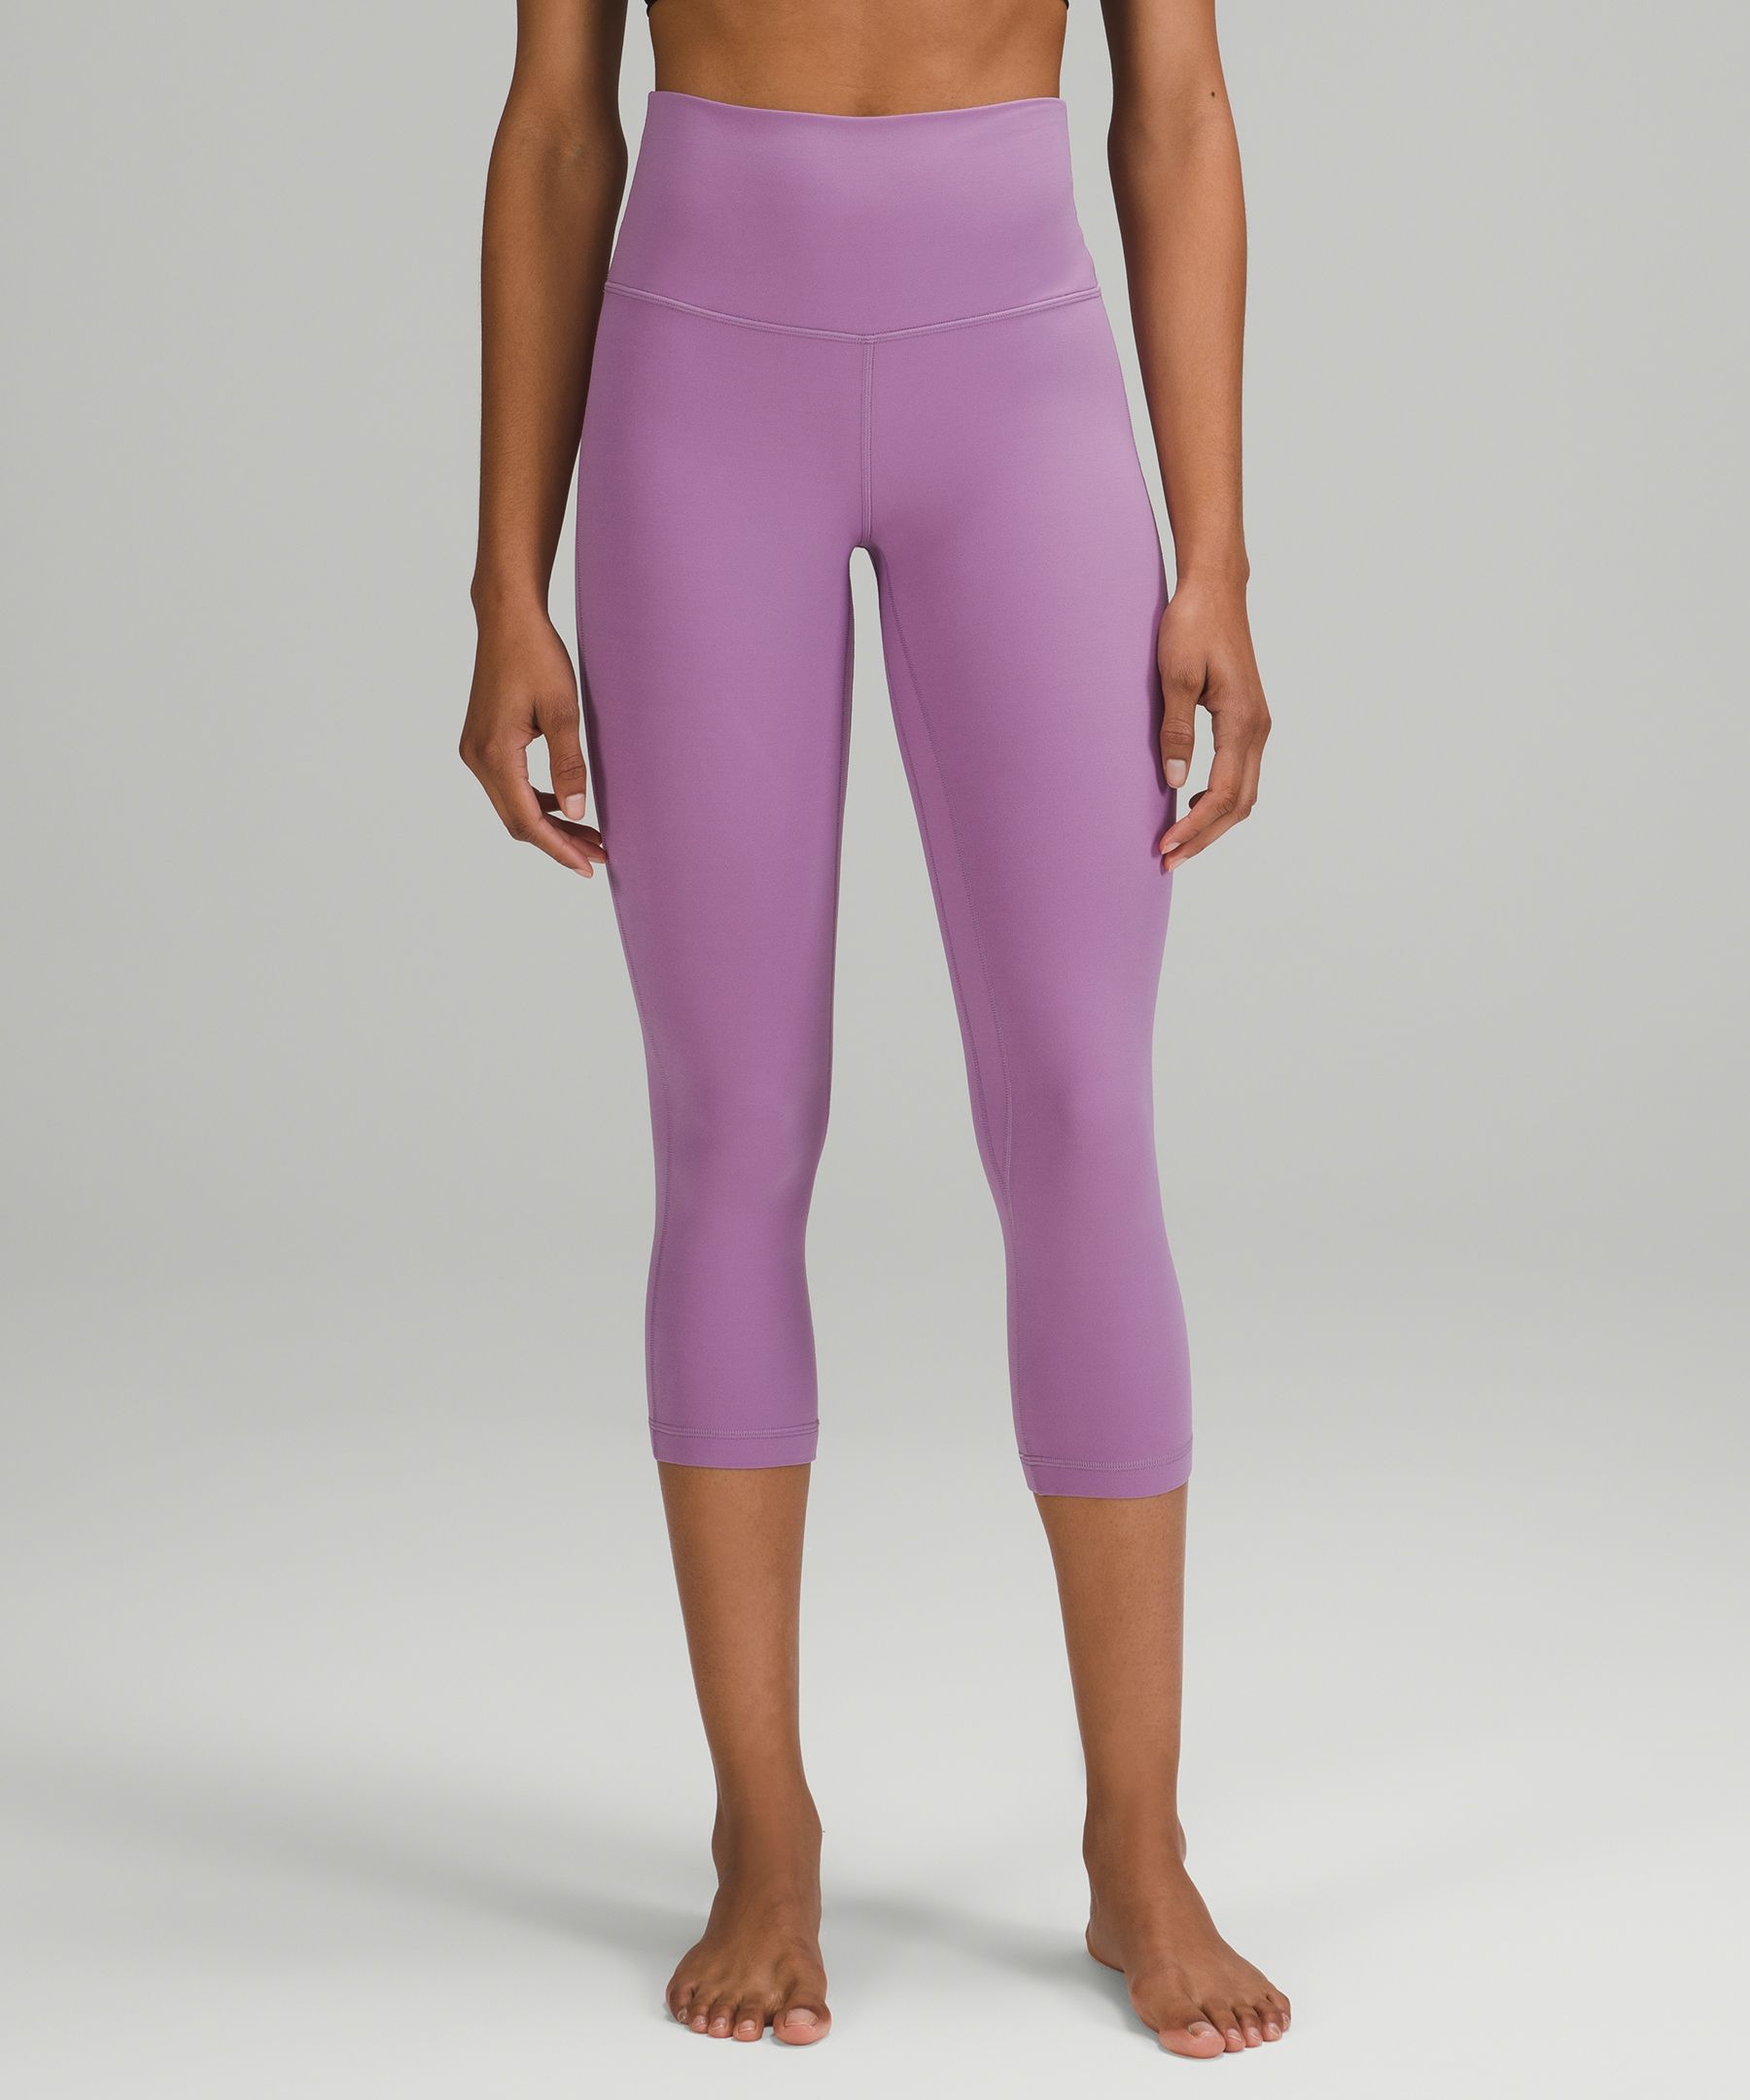 The way our Lilac Leggings shape the female body is unreal